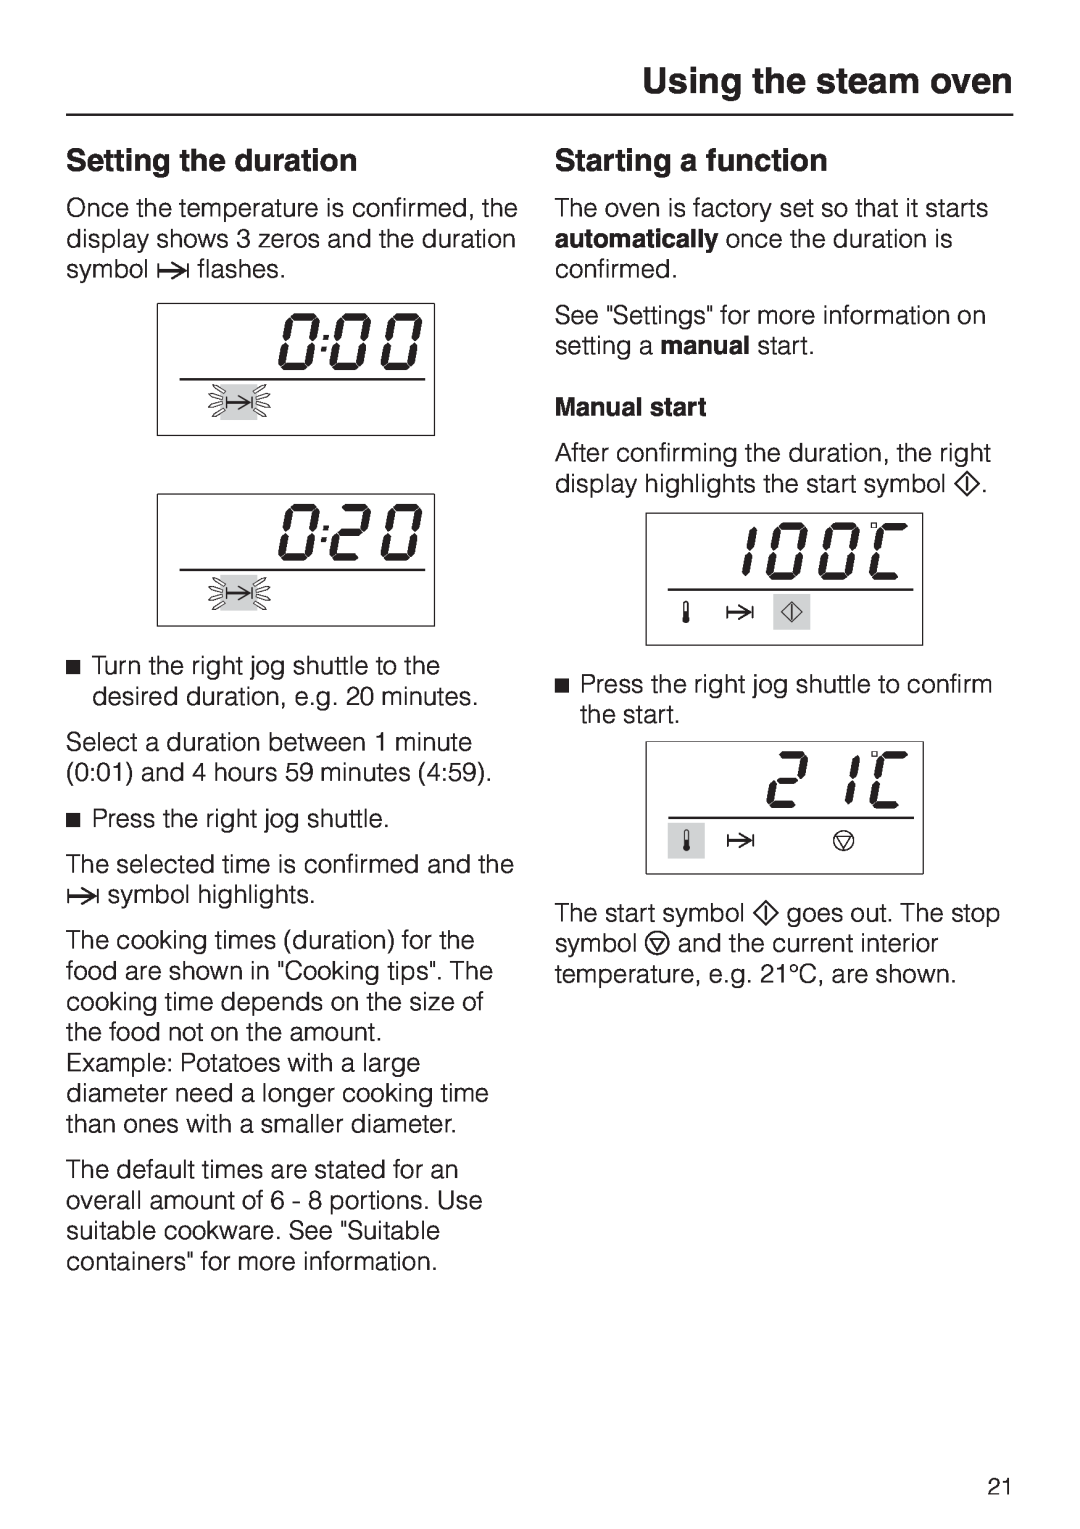 Miele DG 2661 installation instructions Setting the duration, Starting a function, Using the steam oven, Manual start 